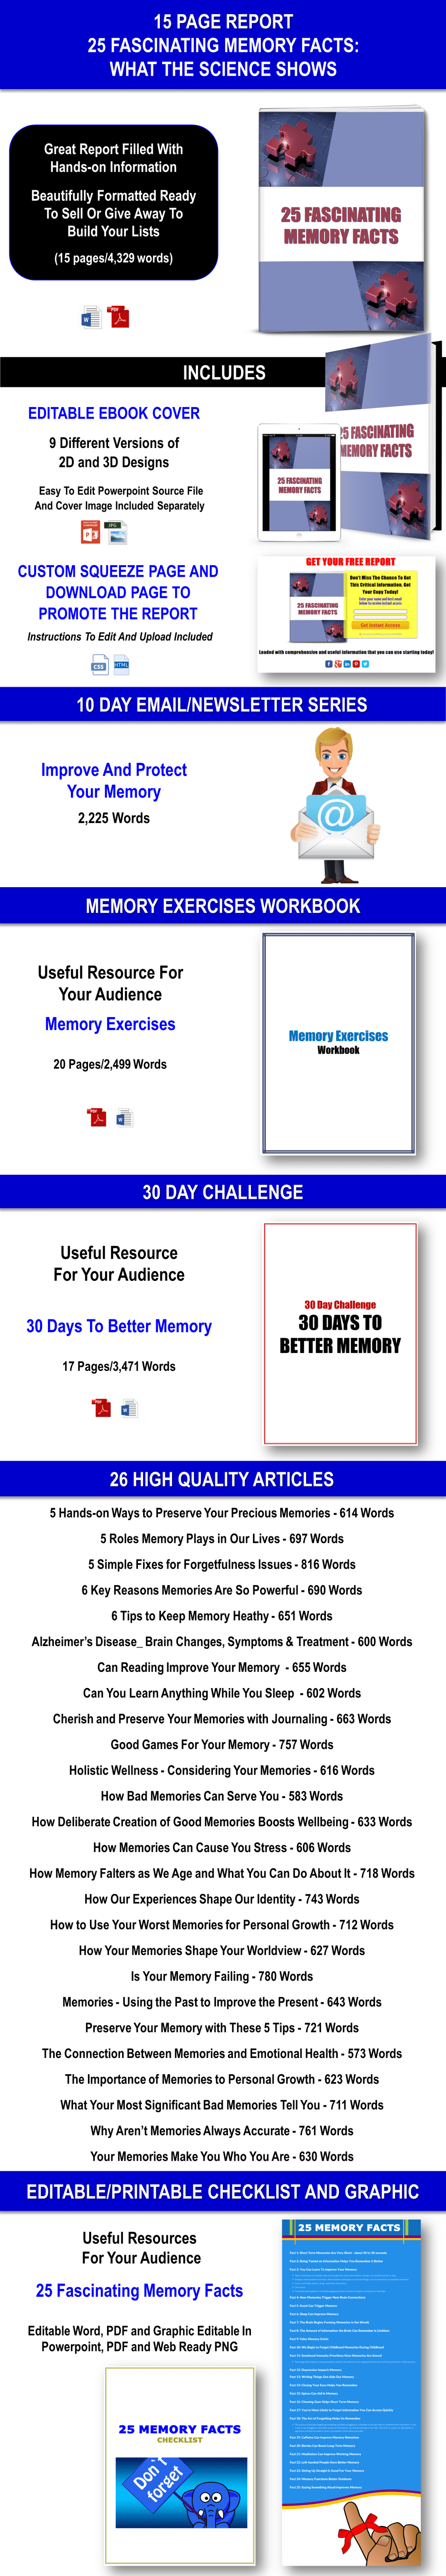 KEEP YOUR MEMORY HEALTHY Content with PLR Rights